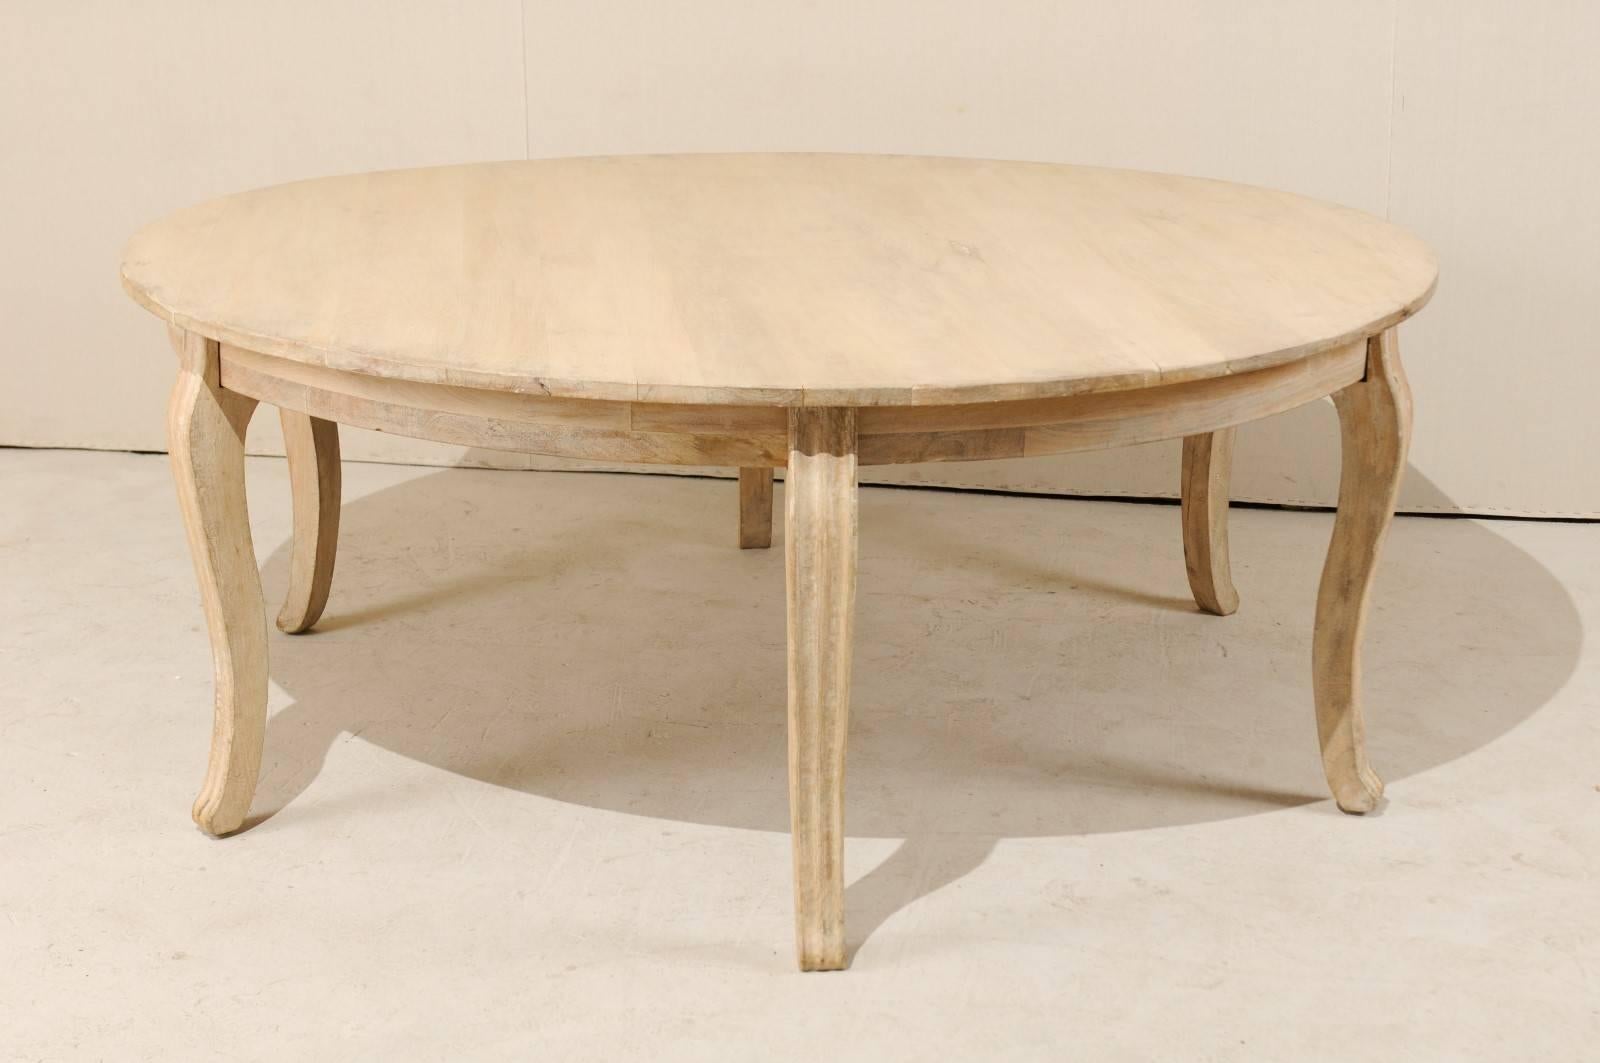 An American round wood dining table of grand size. This round-shaped American table, from the late 20th century, is raised on fluted, cabriole legs. The table is a bleached wood with a clear matte coat. The table is accented with a pale cream